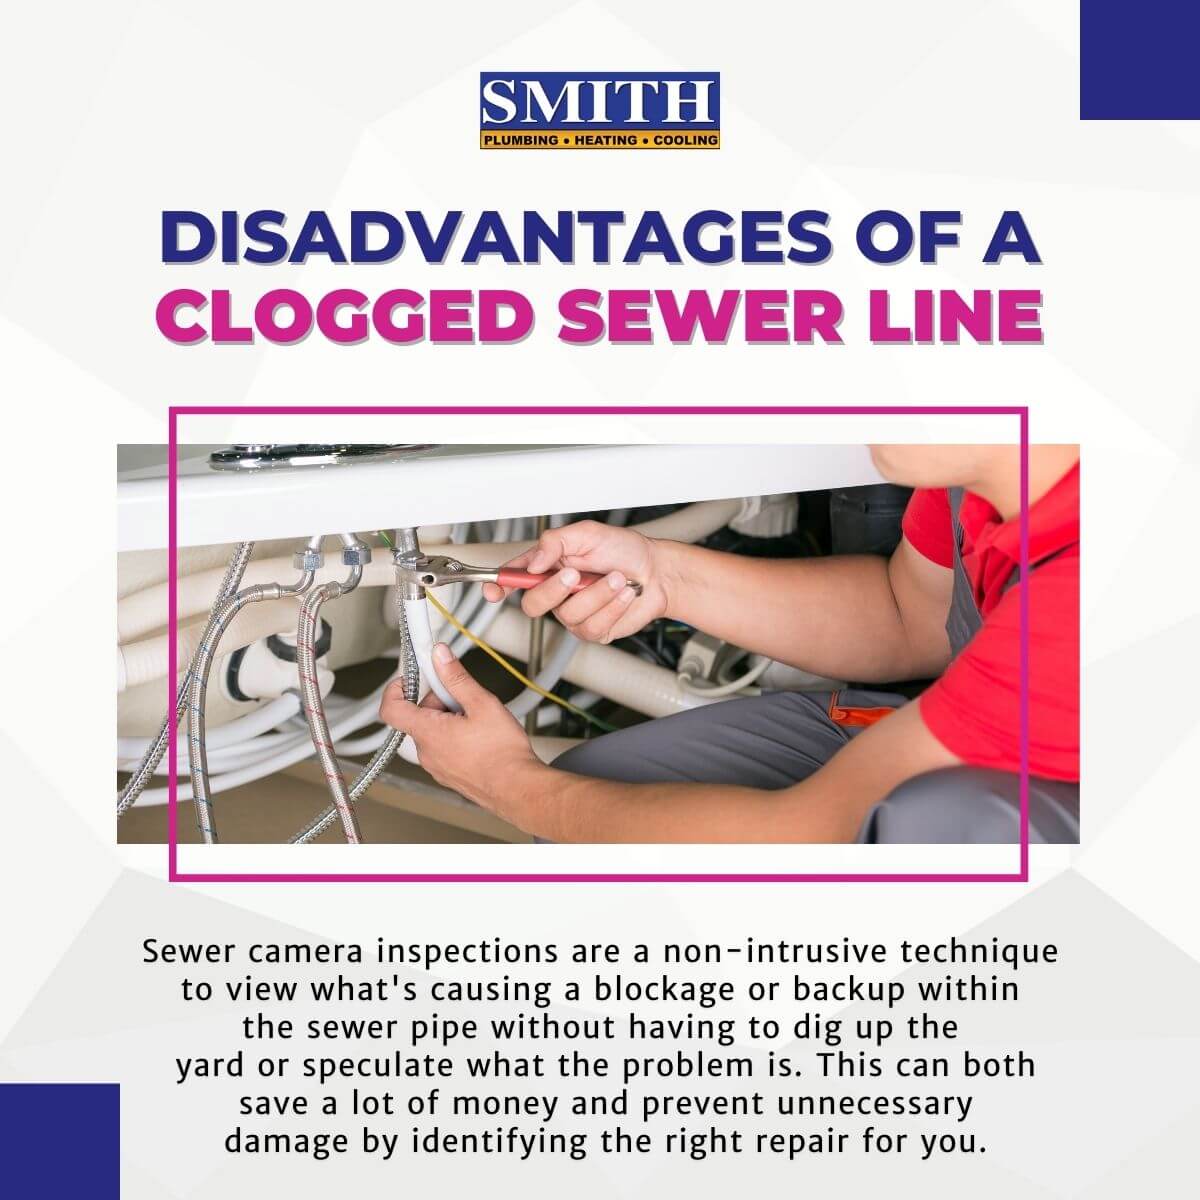 Disadvantages of a clogged sewer line page 9